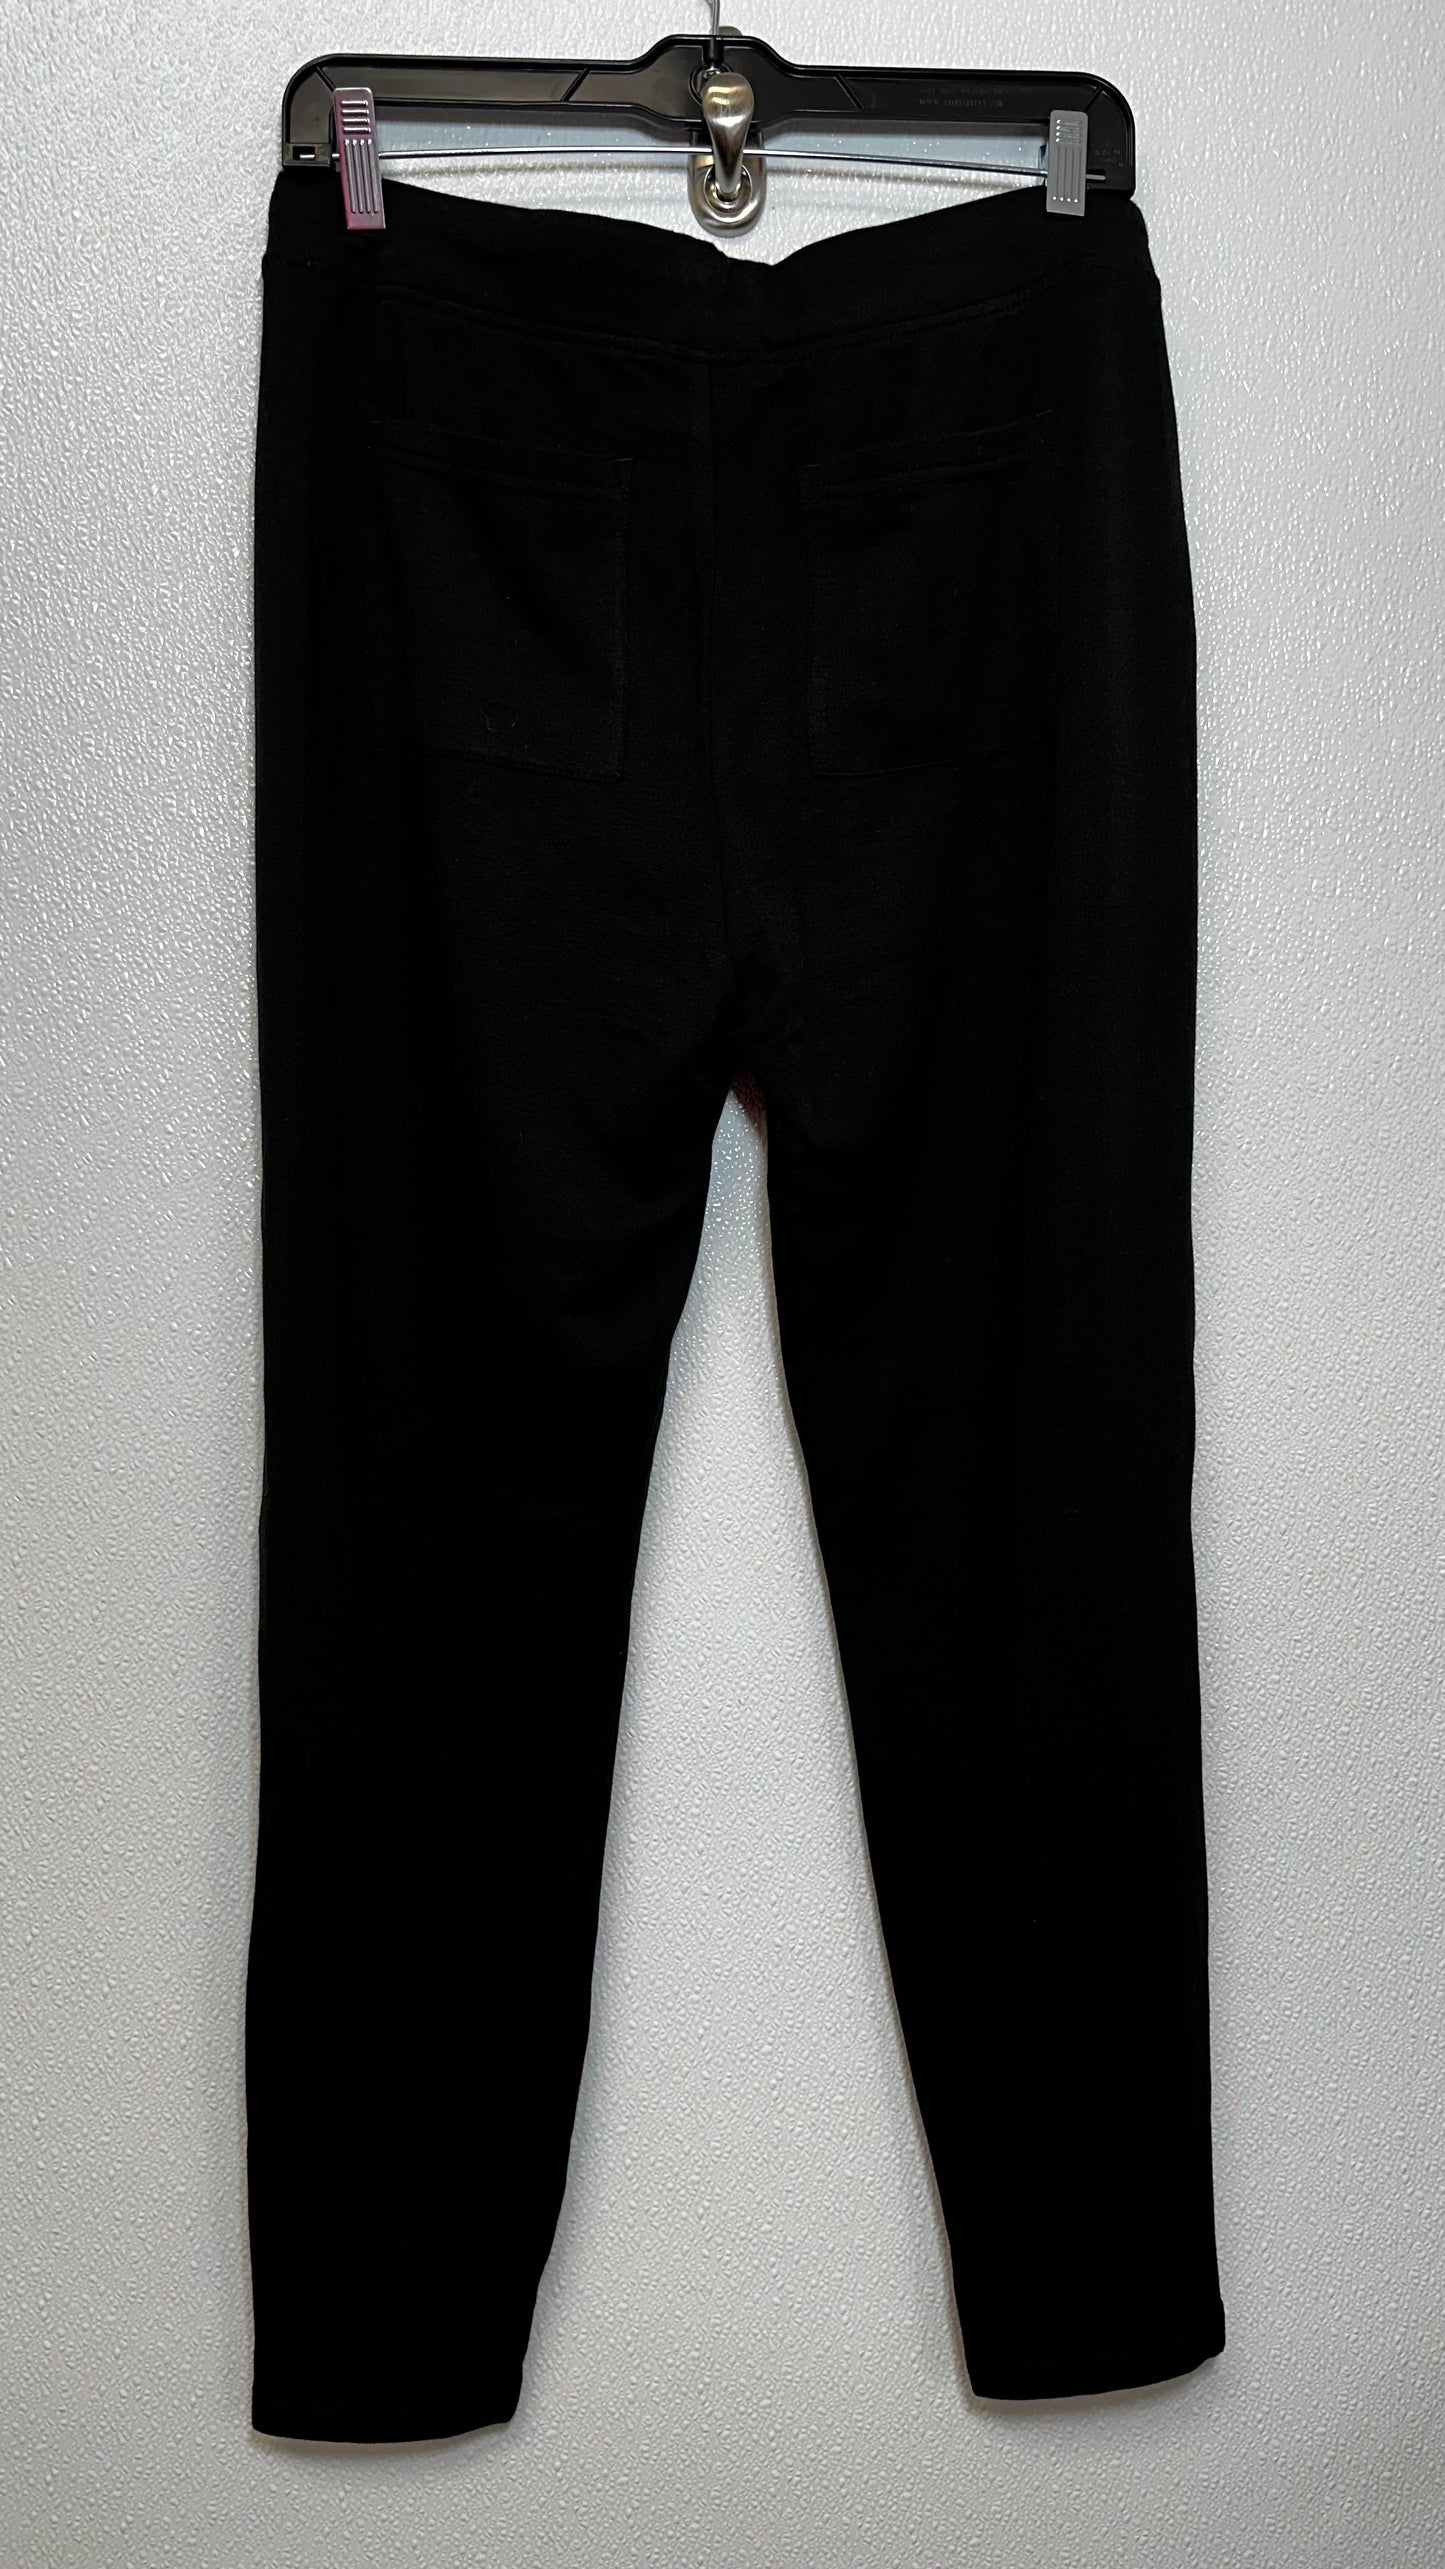 Black Pants Lounge Lou And Grey, Size S